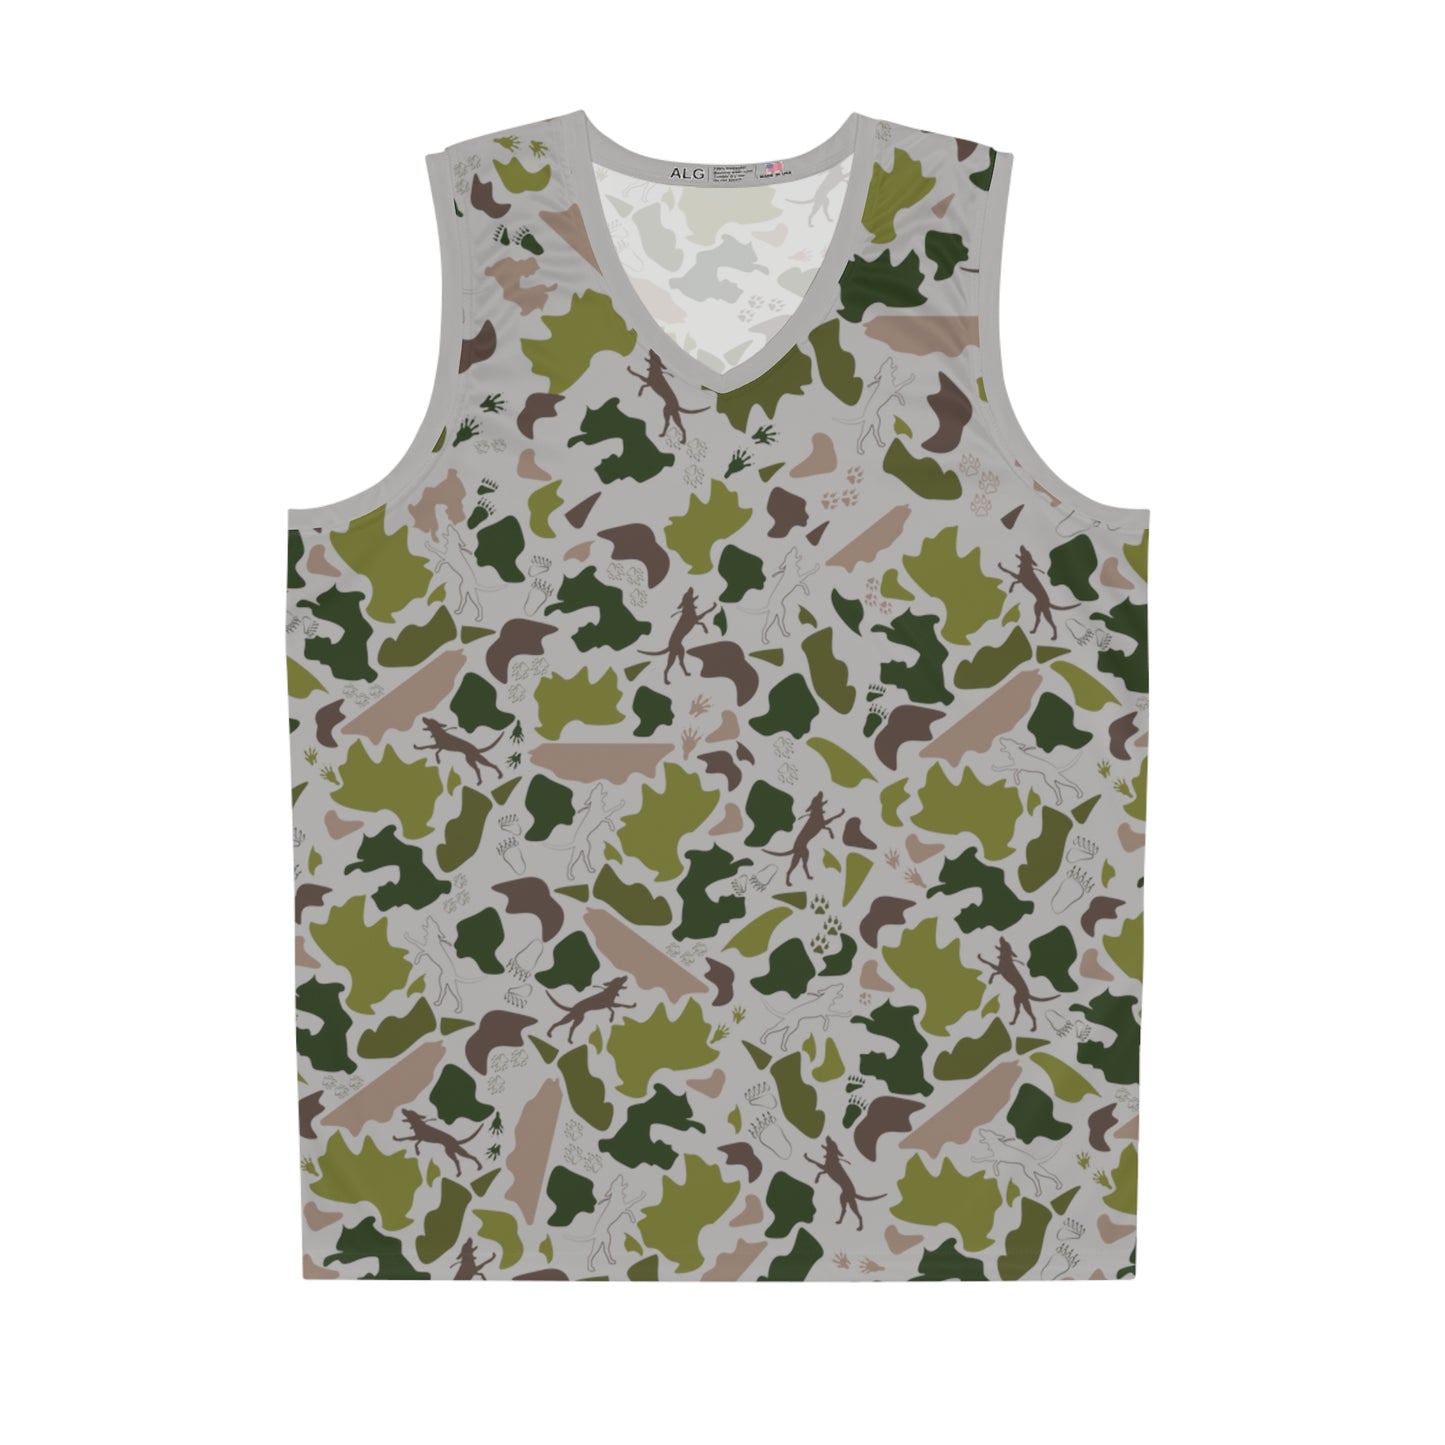 Grey basketball jersey in green and brown camouflage